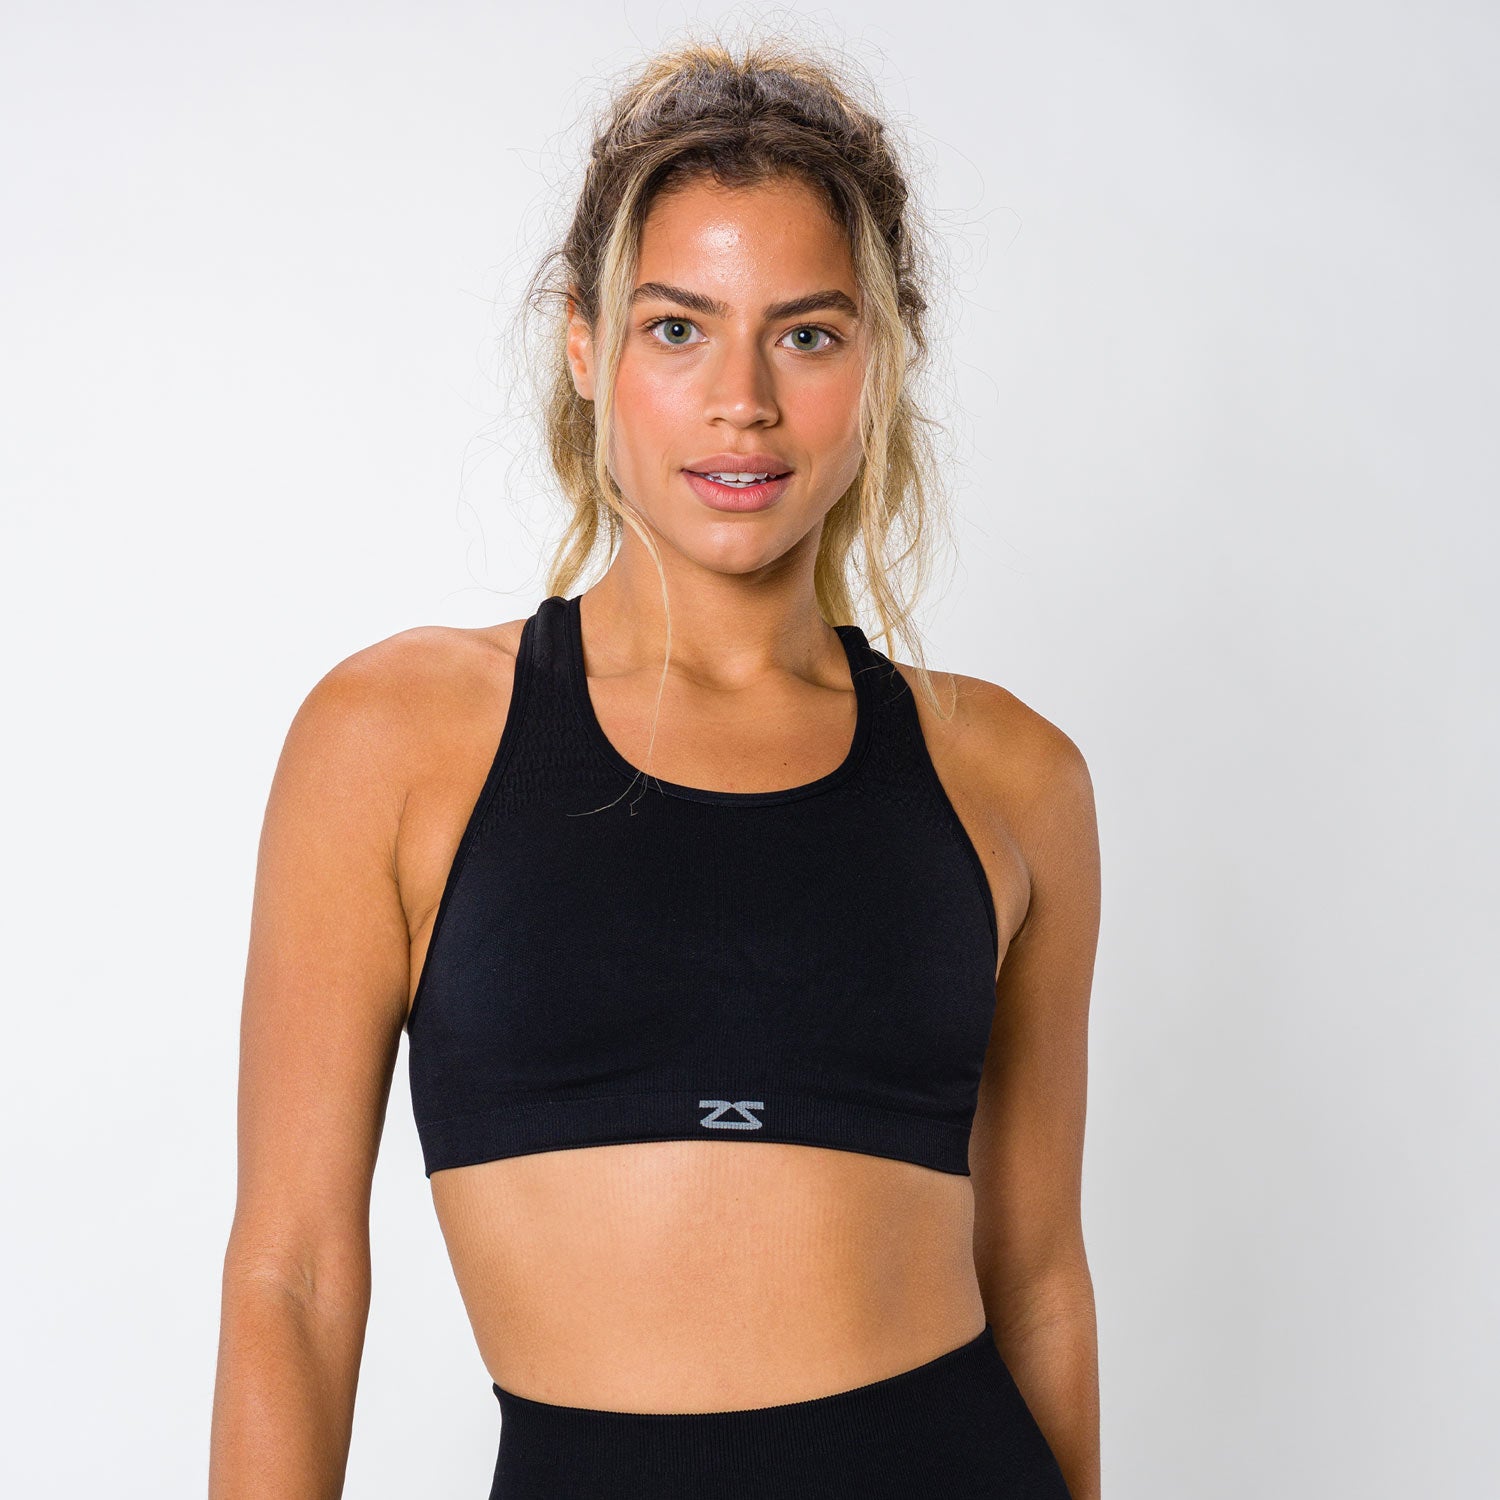 Featured Sports Bras  Best Sports Bras for Running & Workouts